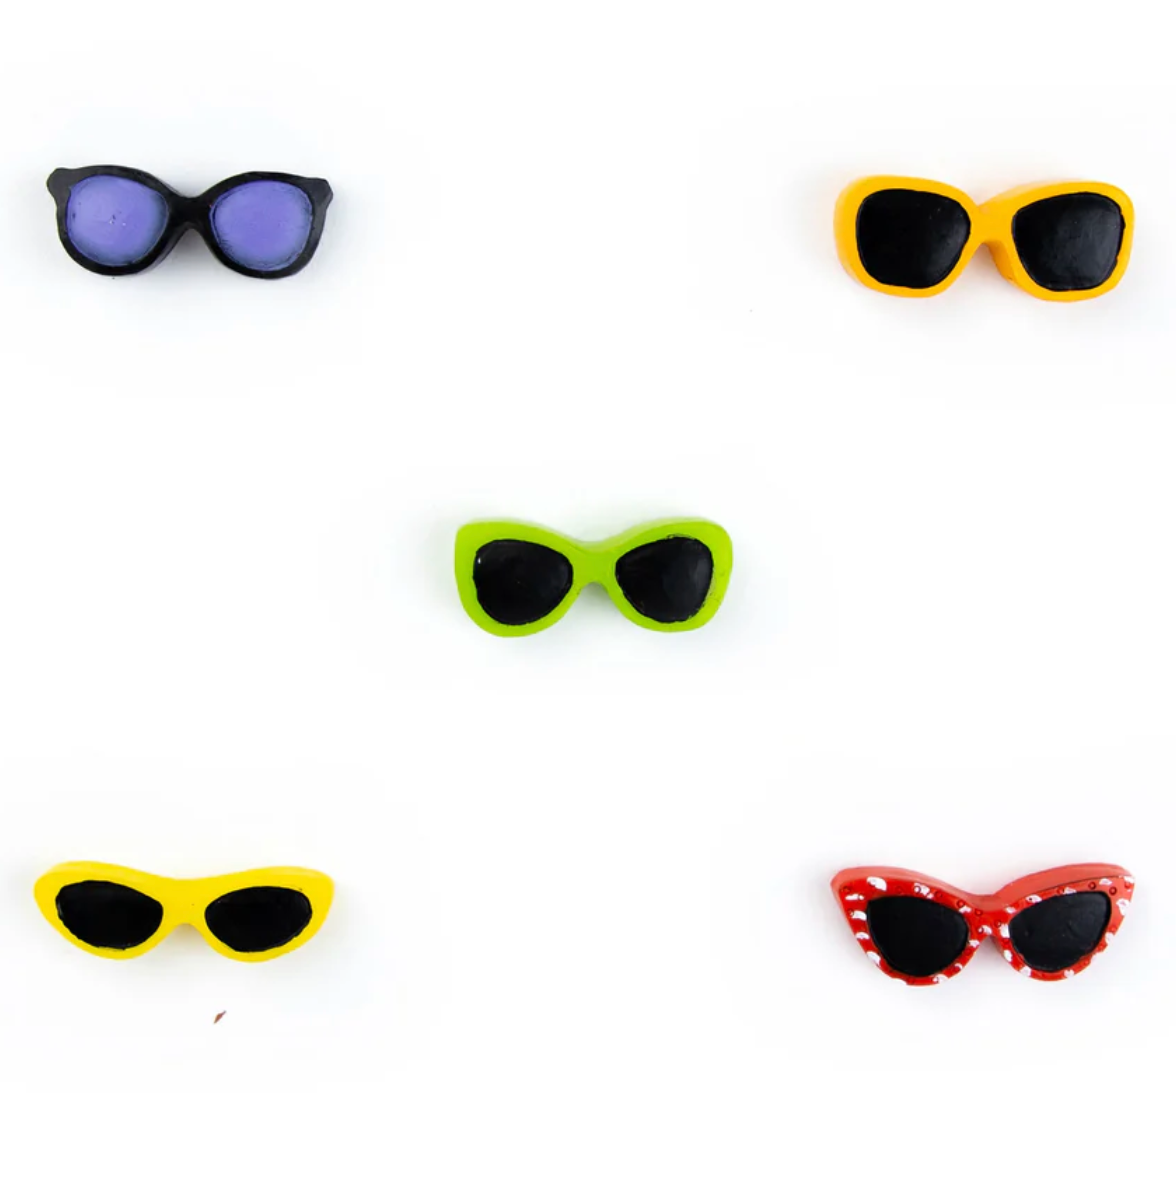 Colorful Sunglass Magnets – Pack of 5